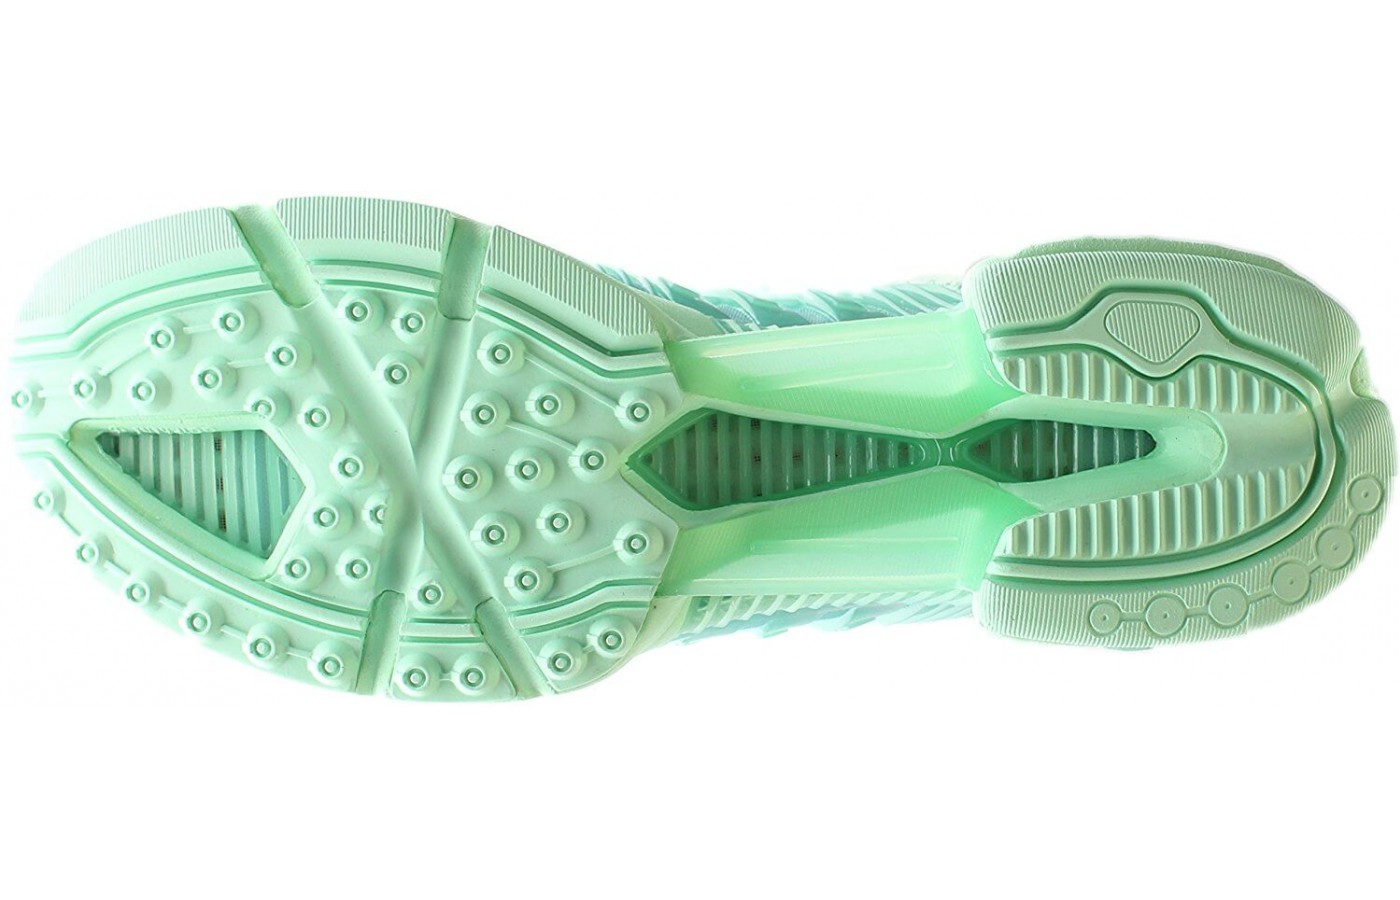 Outsole of Adidas ClimaCool 1